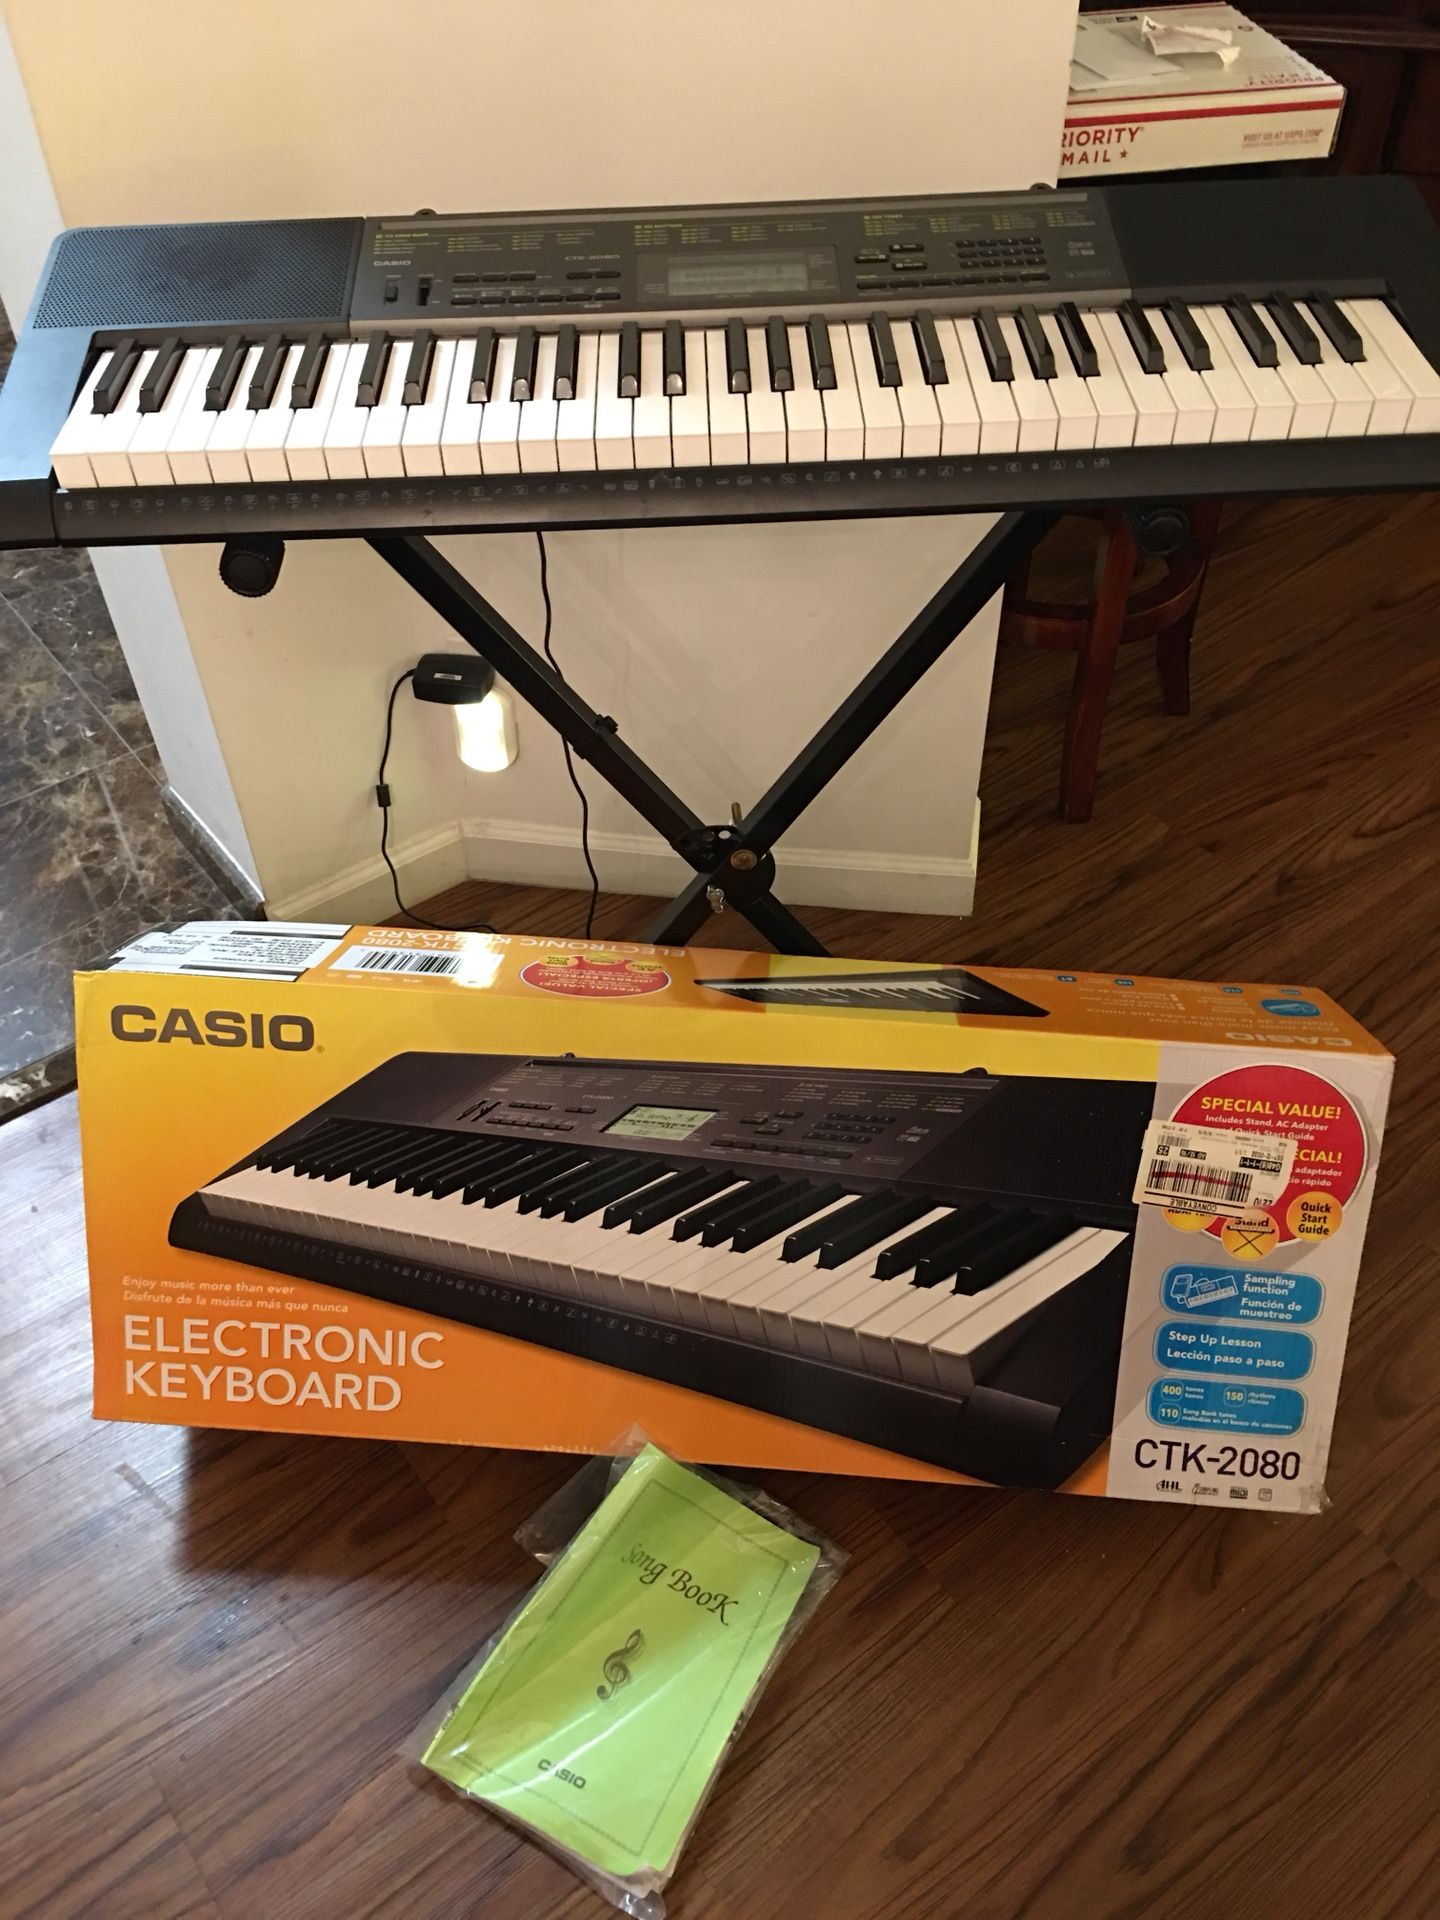 Casio Electronic Keyboard CTK-2080 in Excellent Working & Cosmetic Condition. Original Box, Song Book, Stand and AC charger. $110 OBO.